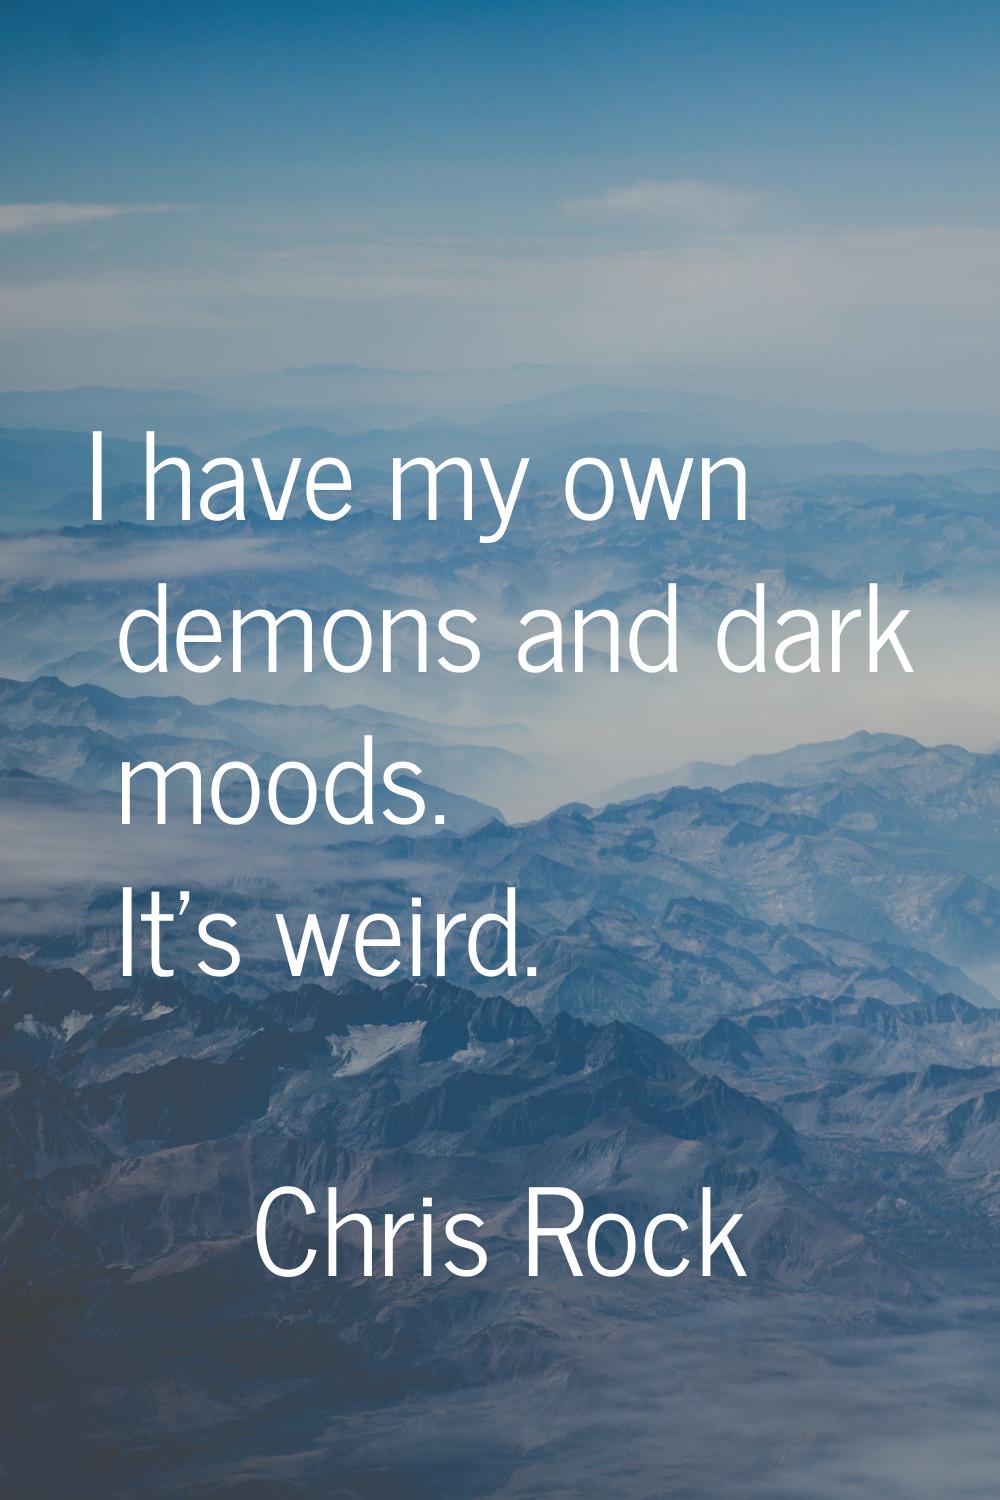 I have my own demons and dark moods. It's weird.